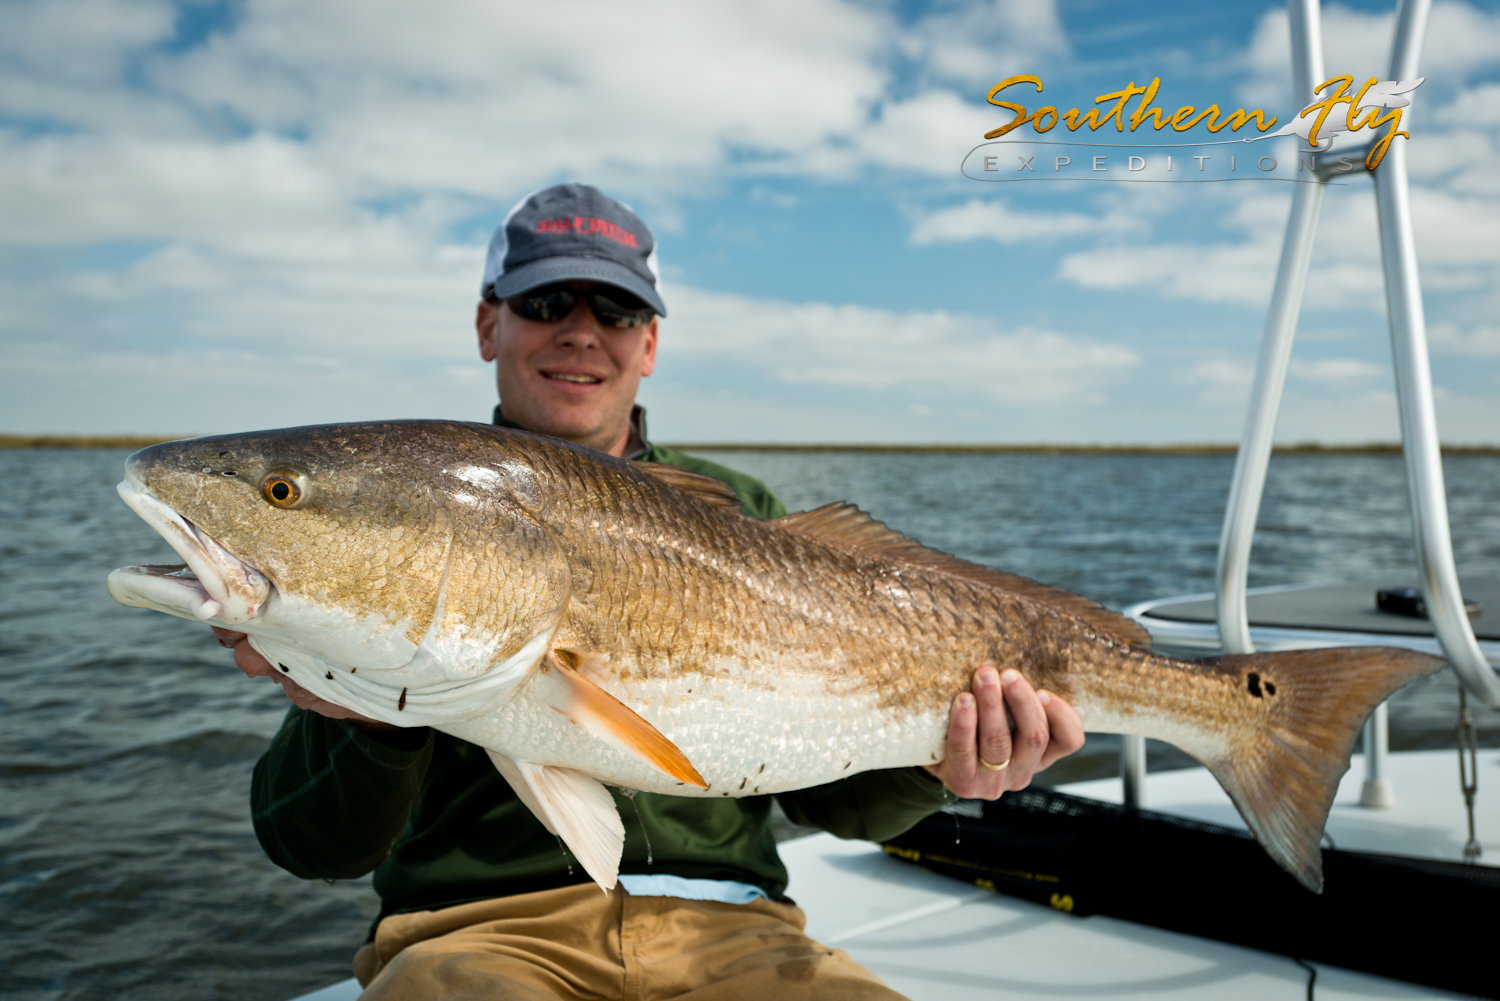 Fly fishing for redfish in New Orleans